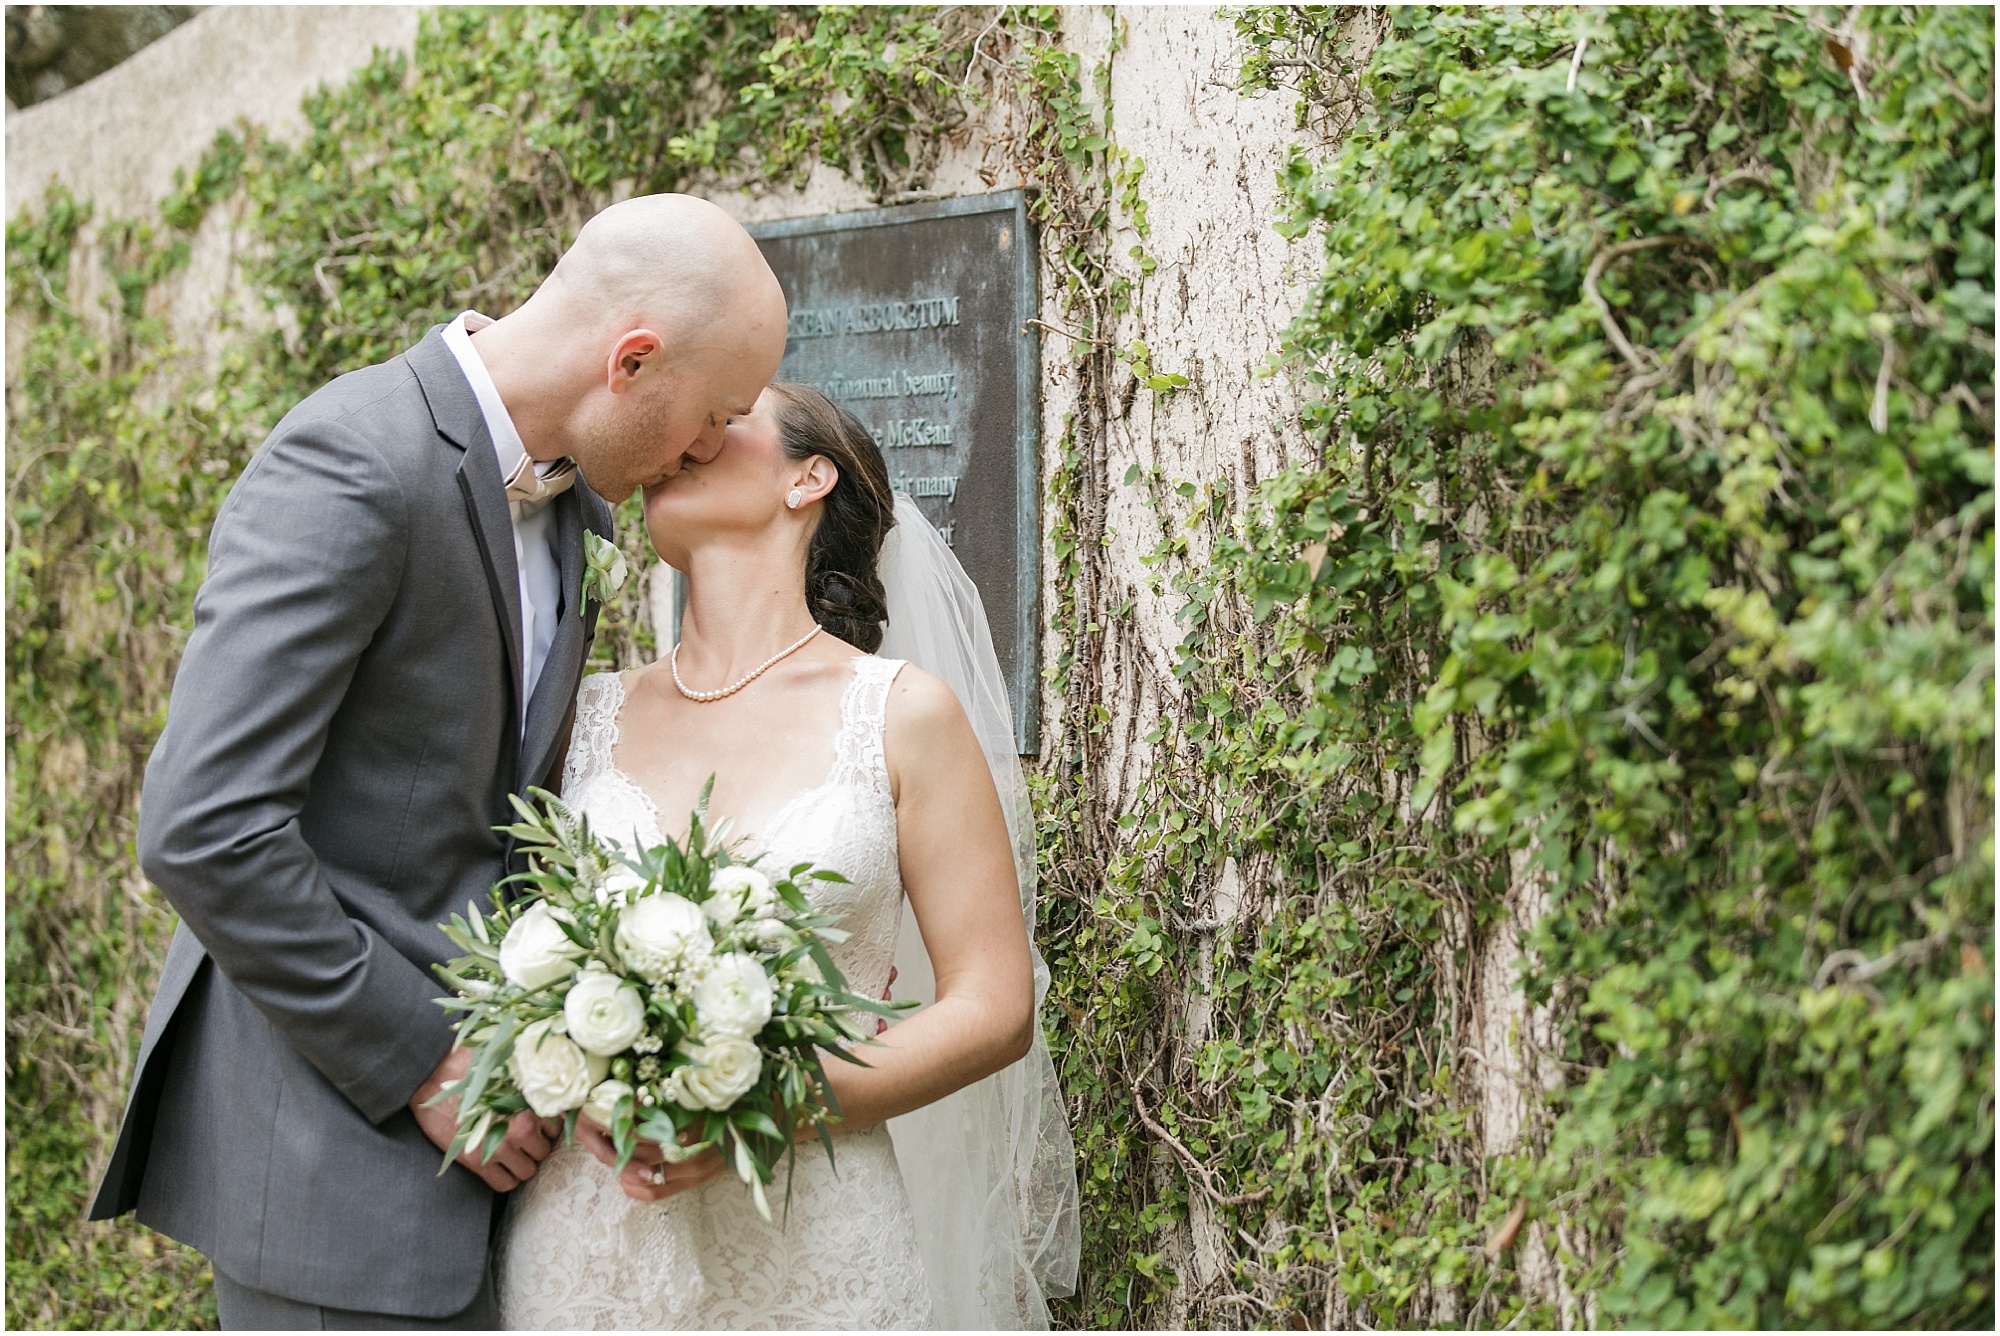 Bride and Groom kissing while standing next to a wall covered in vines.